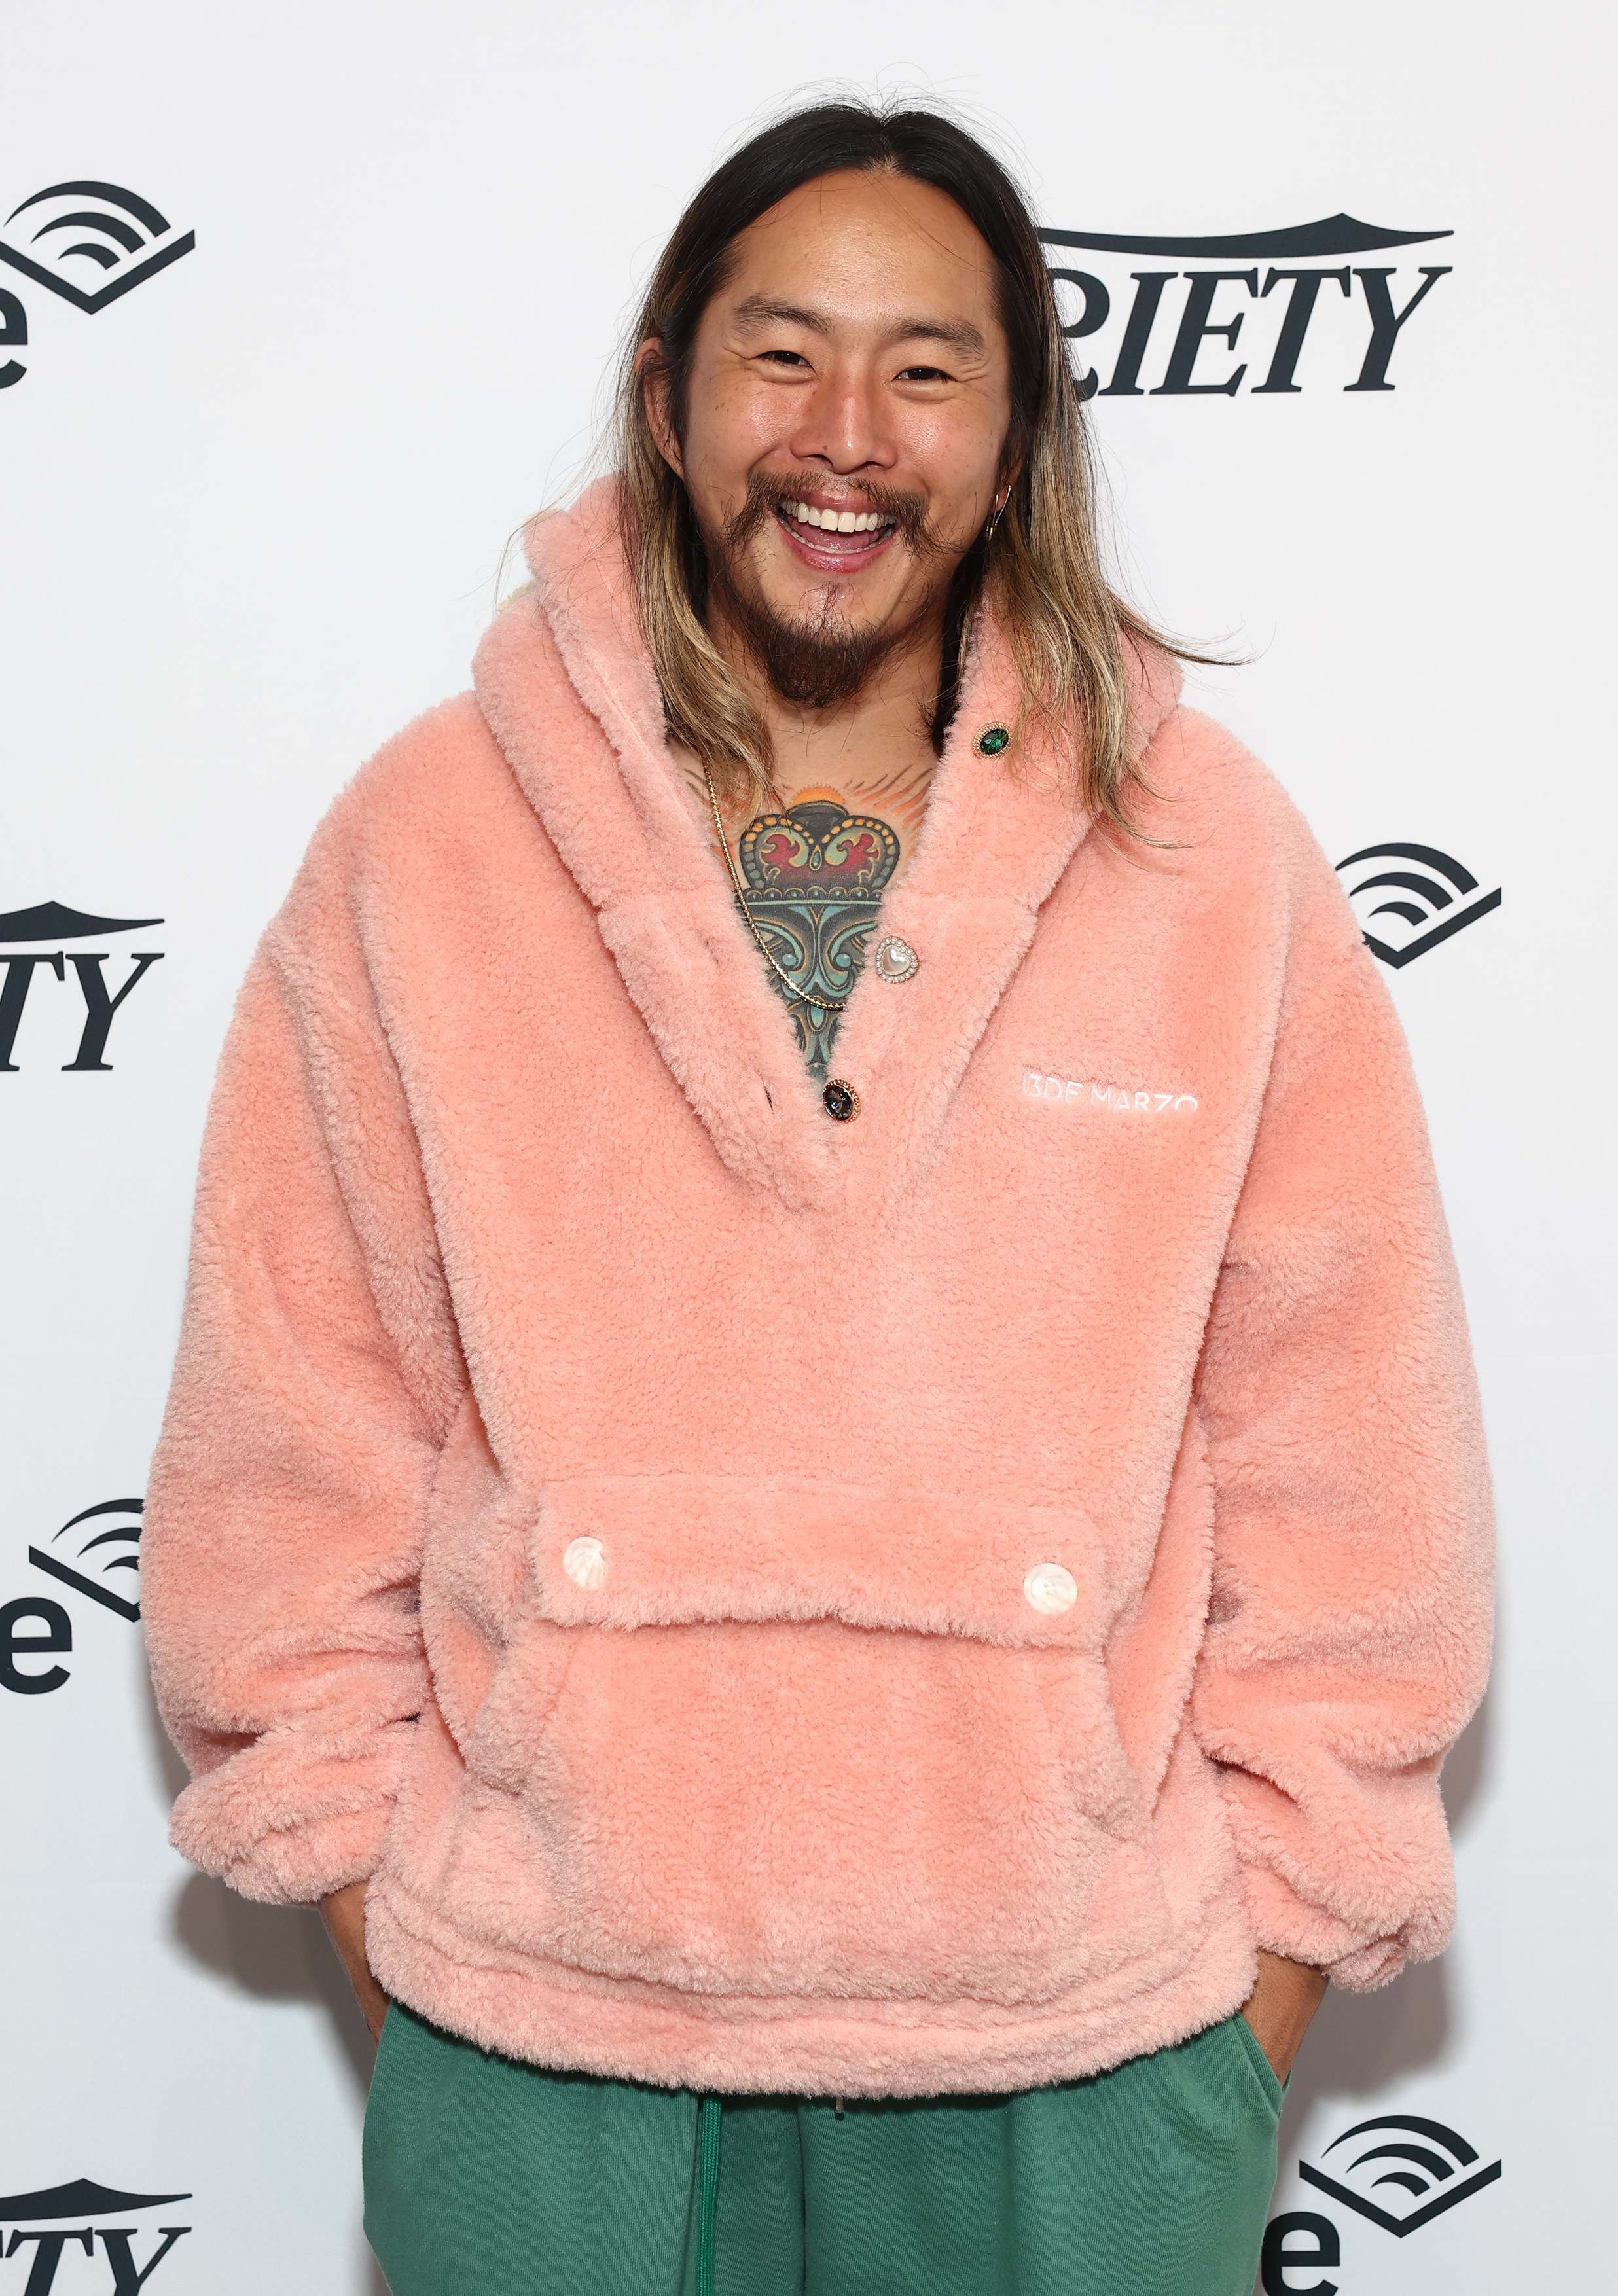 closeup of him in a fuzzy sweater, smiling big with long hair at an event